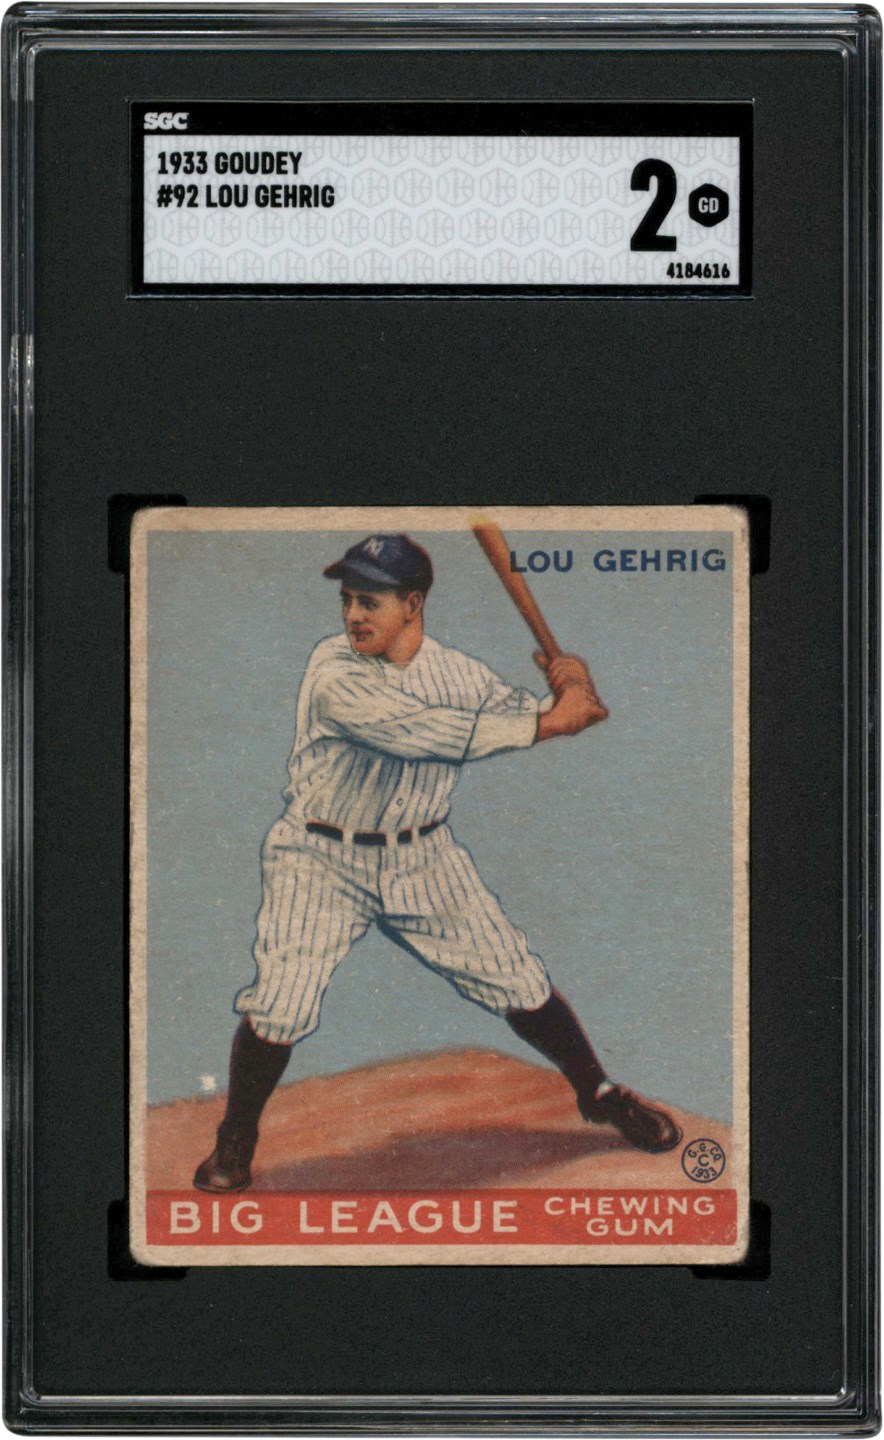 Baseball and Trading Cards - 1933 Goudey #92 Lou Gehrig SGC GD 2